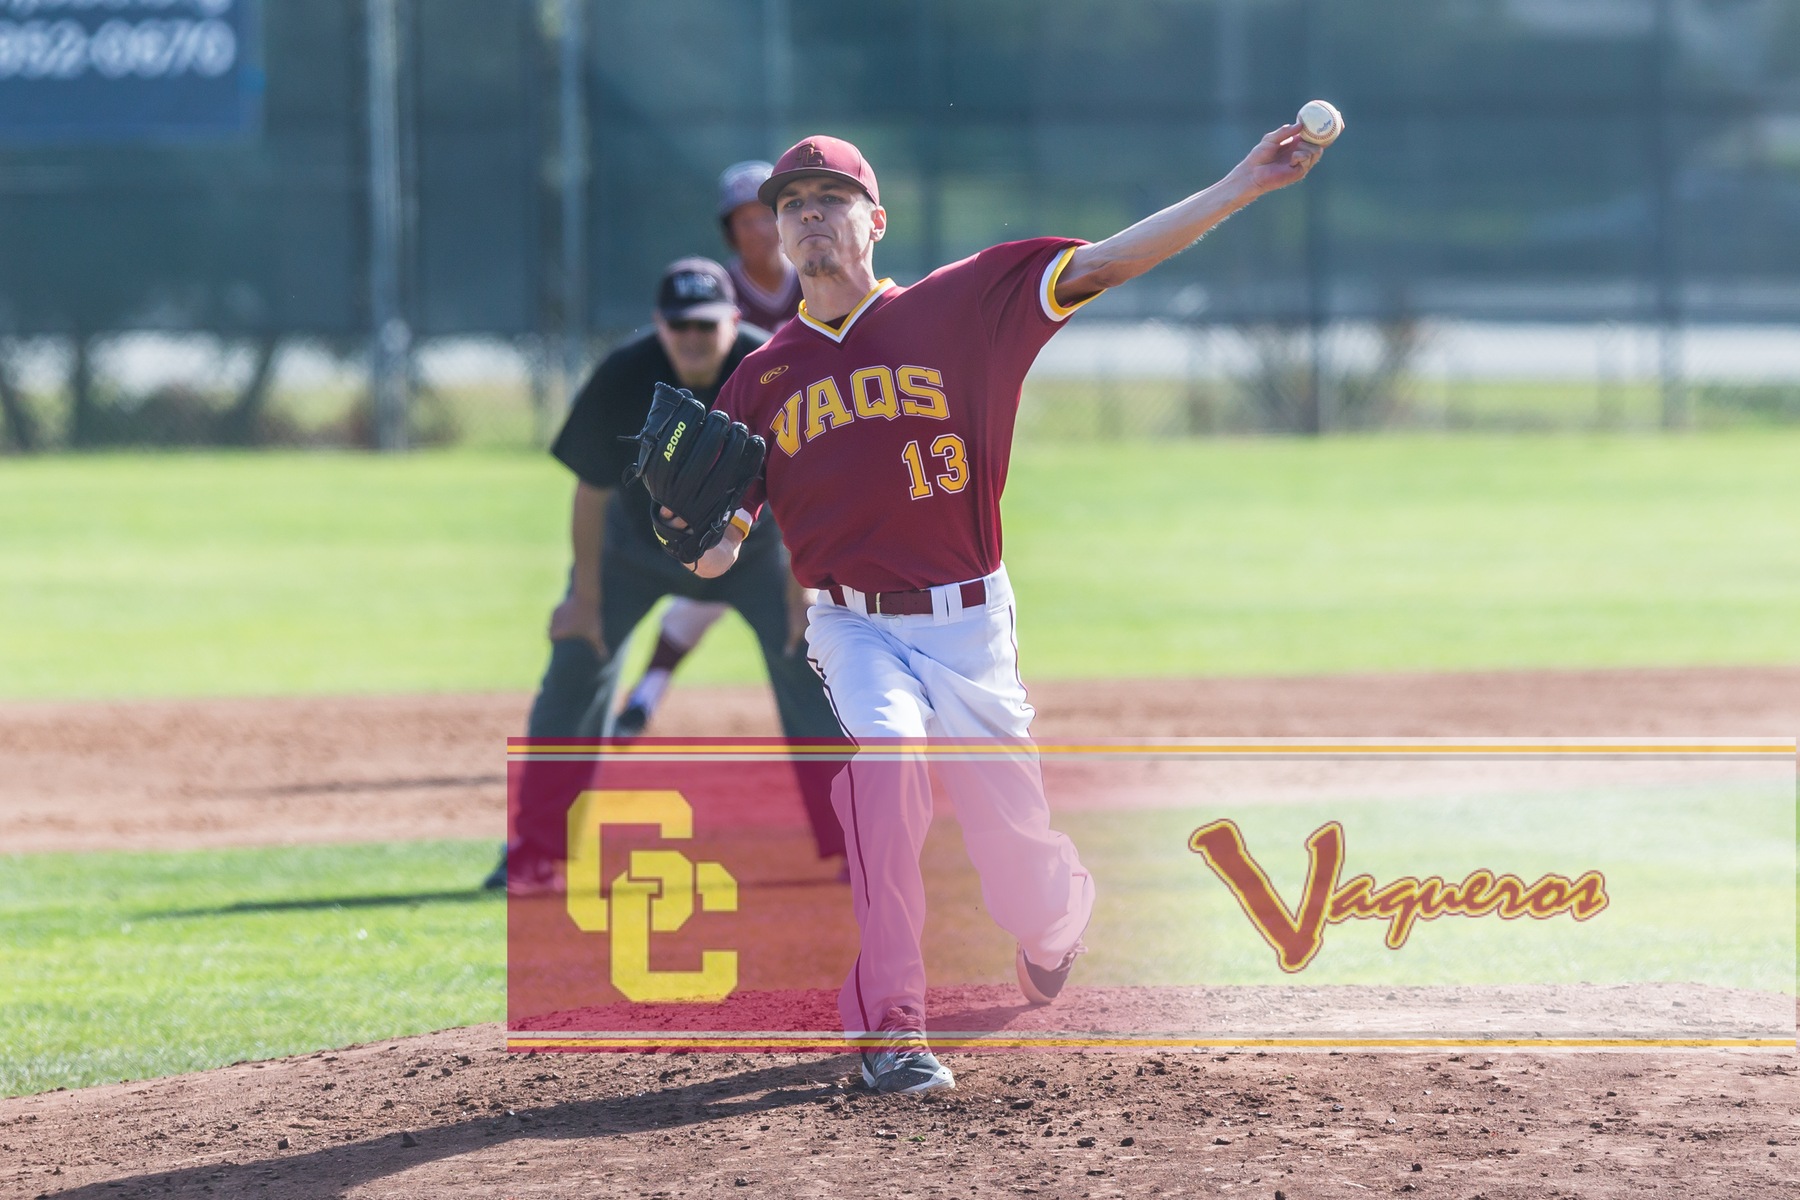 Davidson pitches Vaqueros to a 5-1 win over PCC